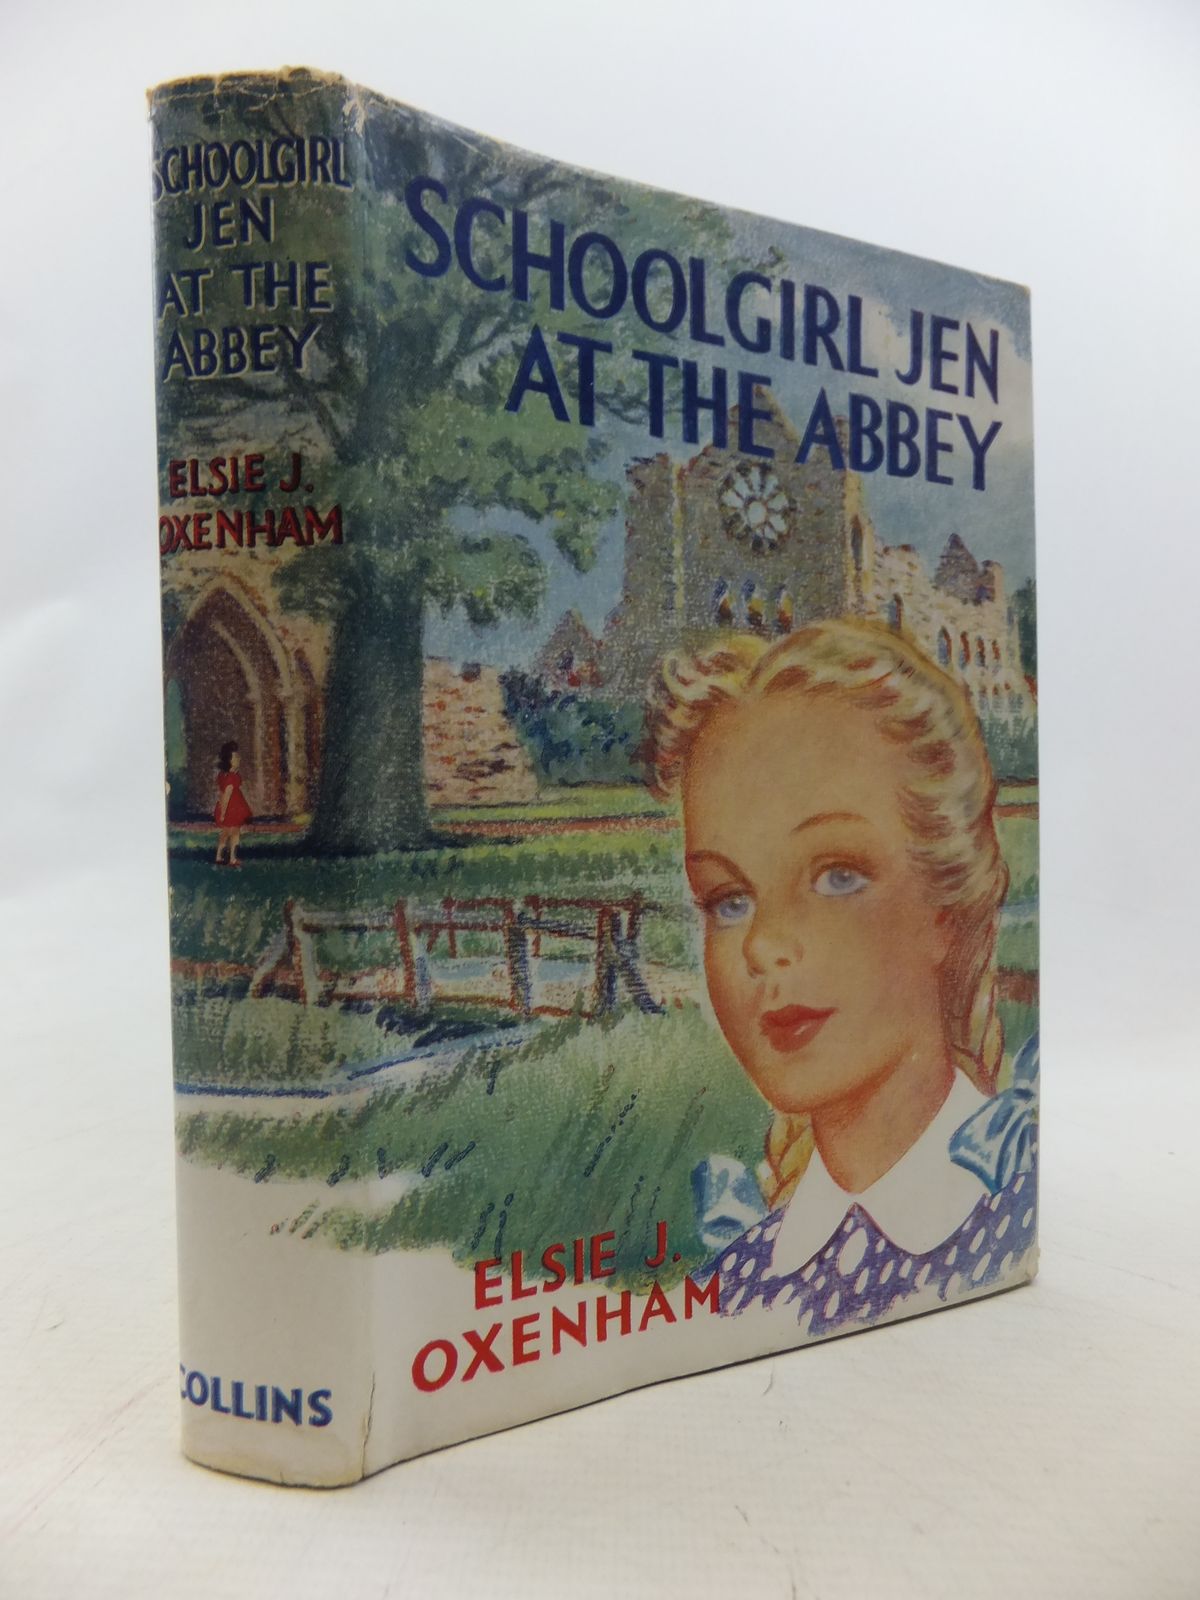 Cover of SCHOOLGIRL JEN AT THE ABBEY by Elsie J. Oxenham